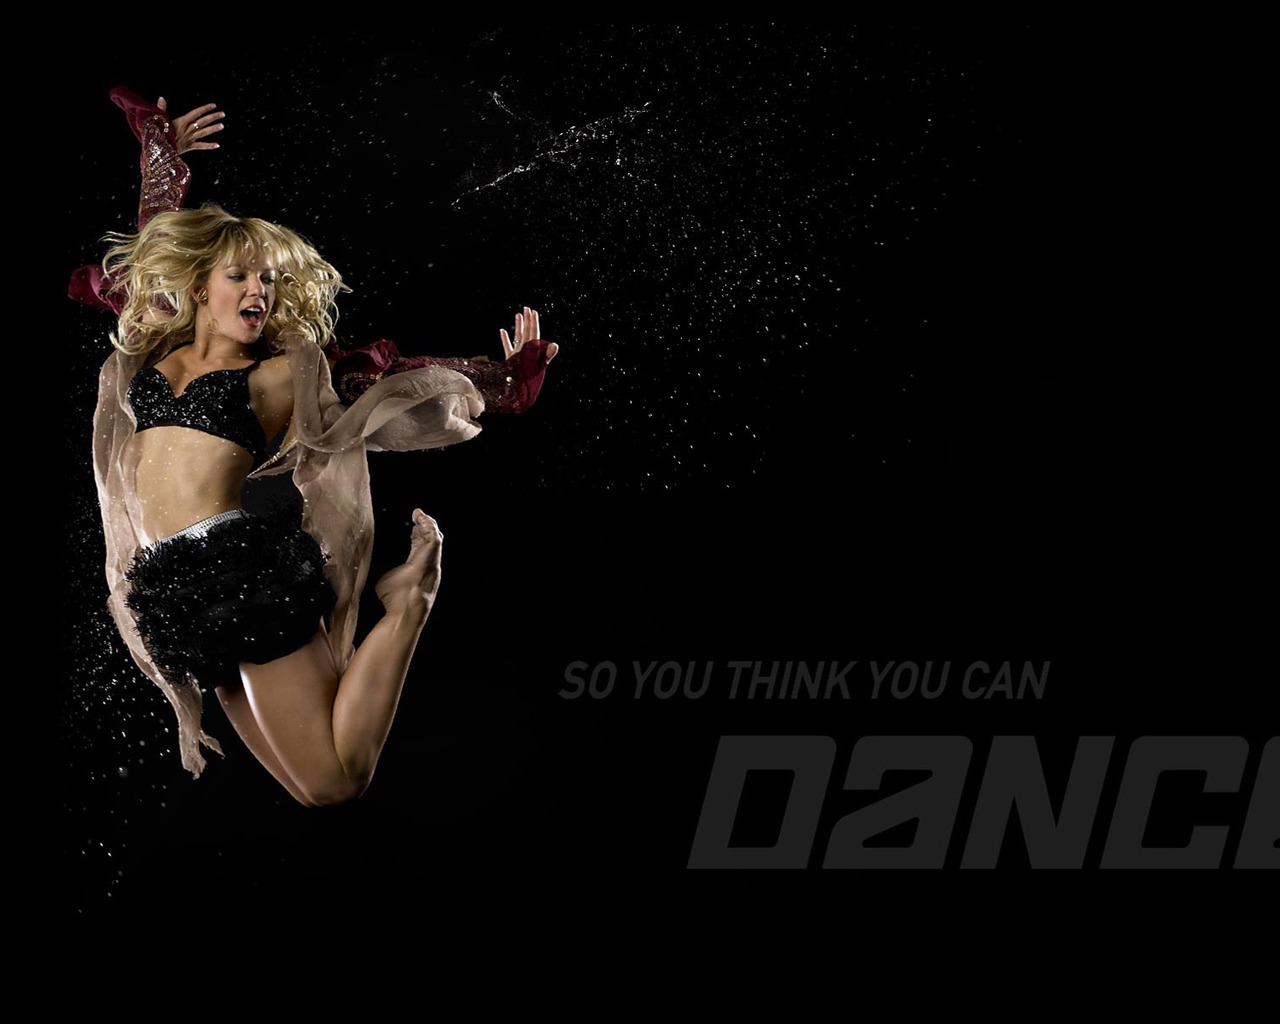 So You Think You Can Dance wallpaper (1) #7 - 1280x1024